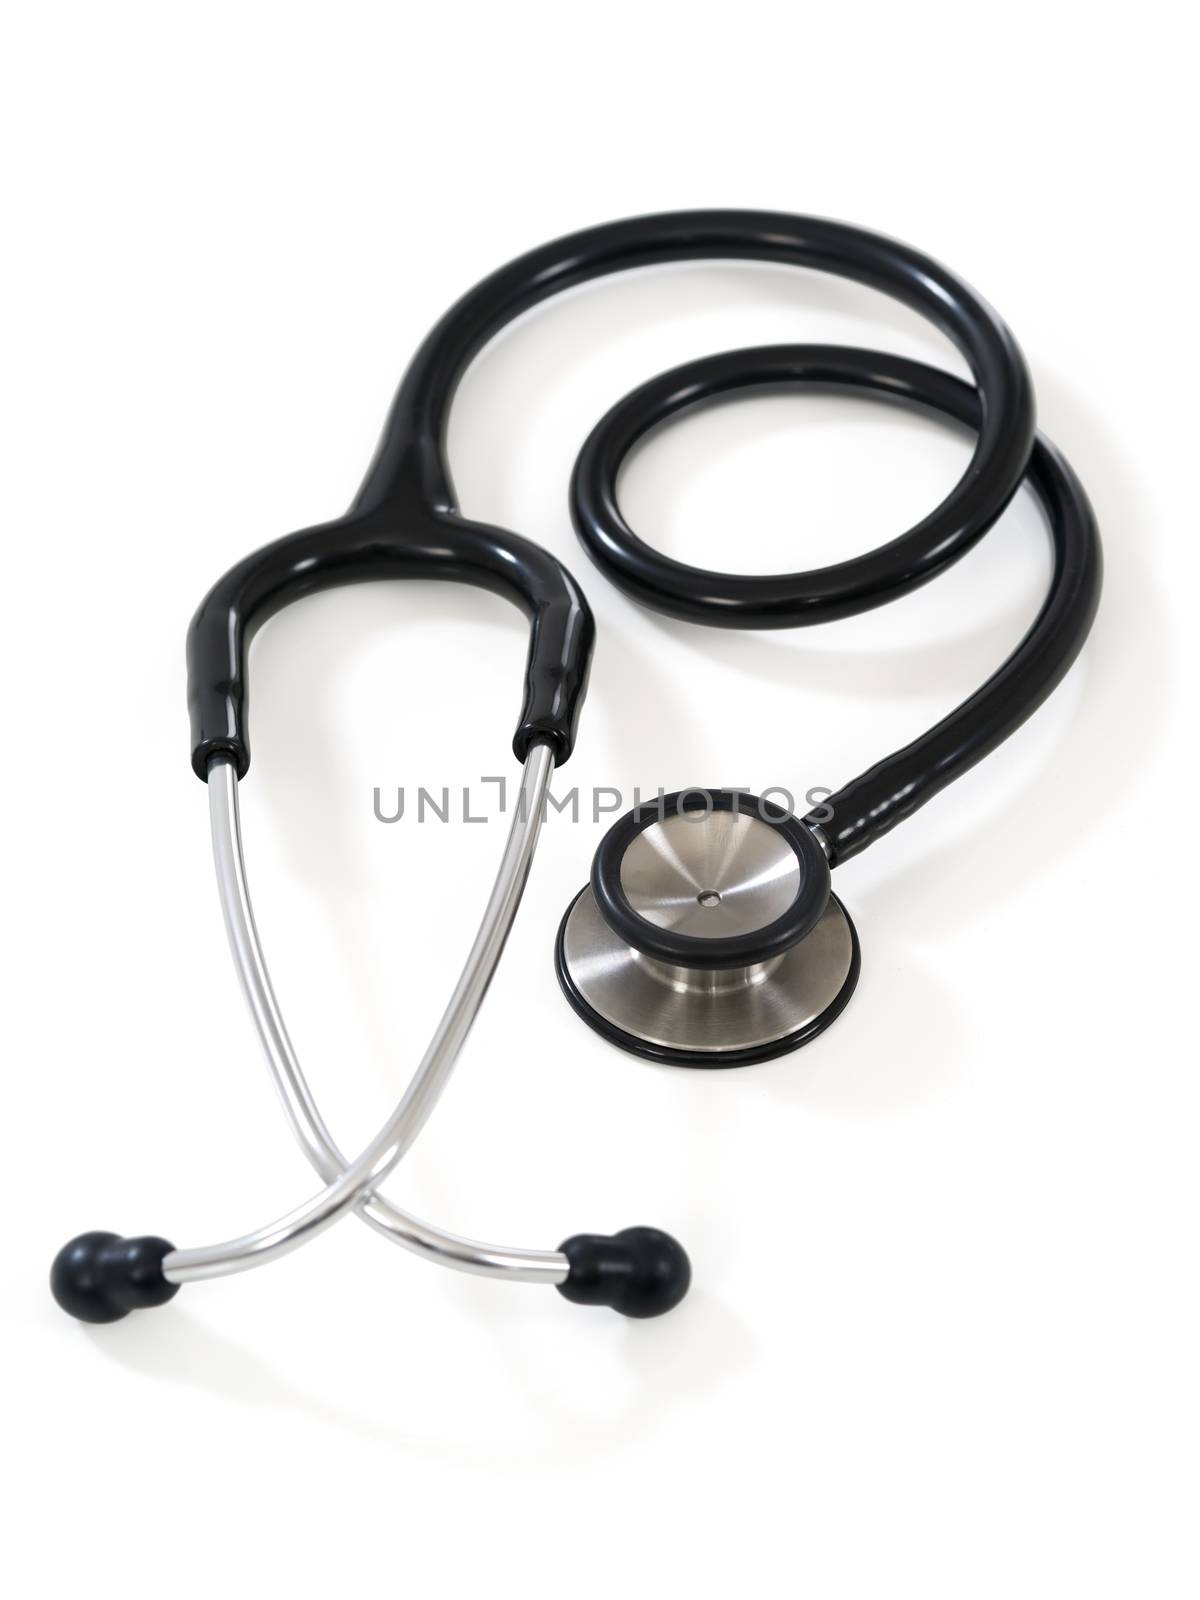 Photo of a stethoscope on white background with slight shadow visible. Clipping path included.